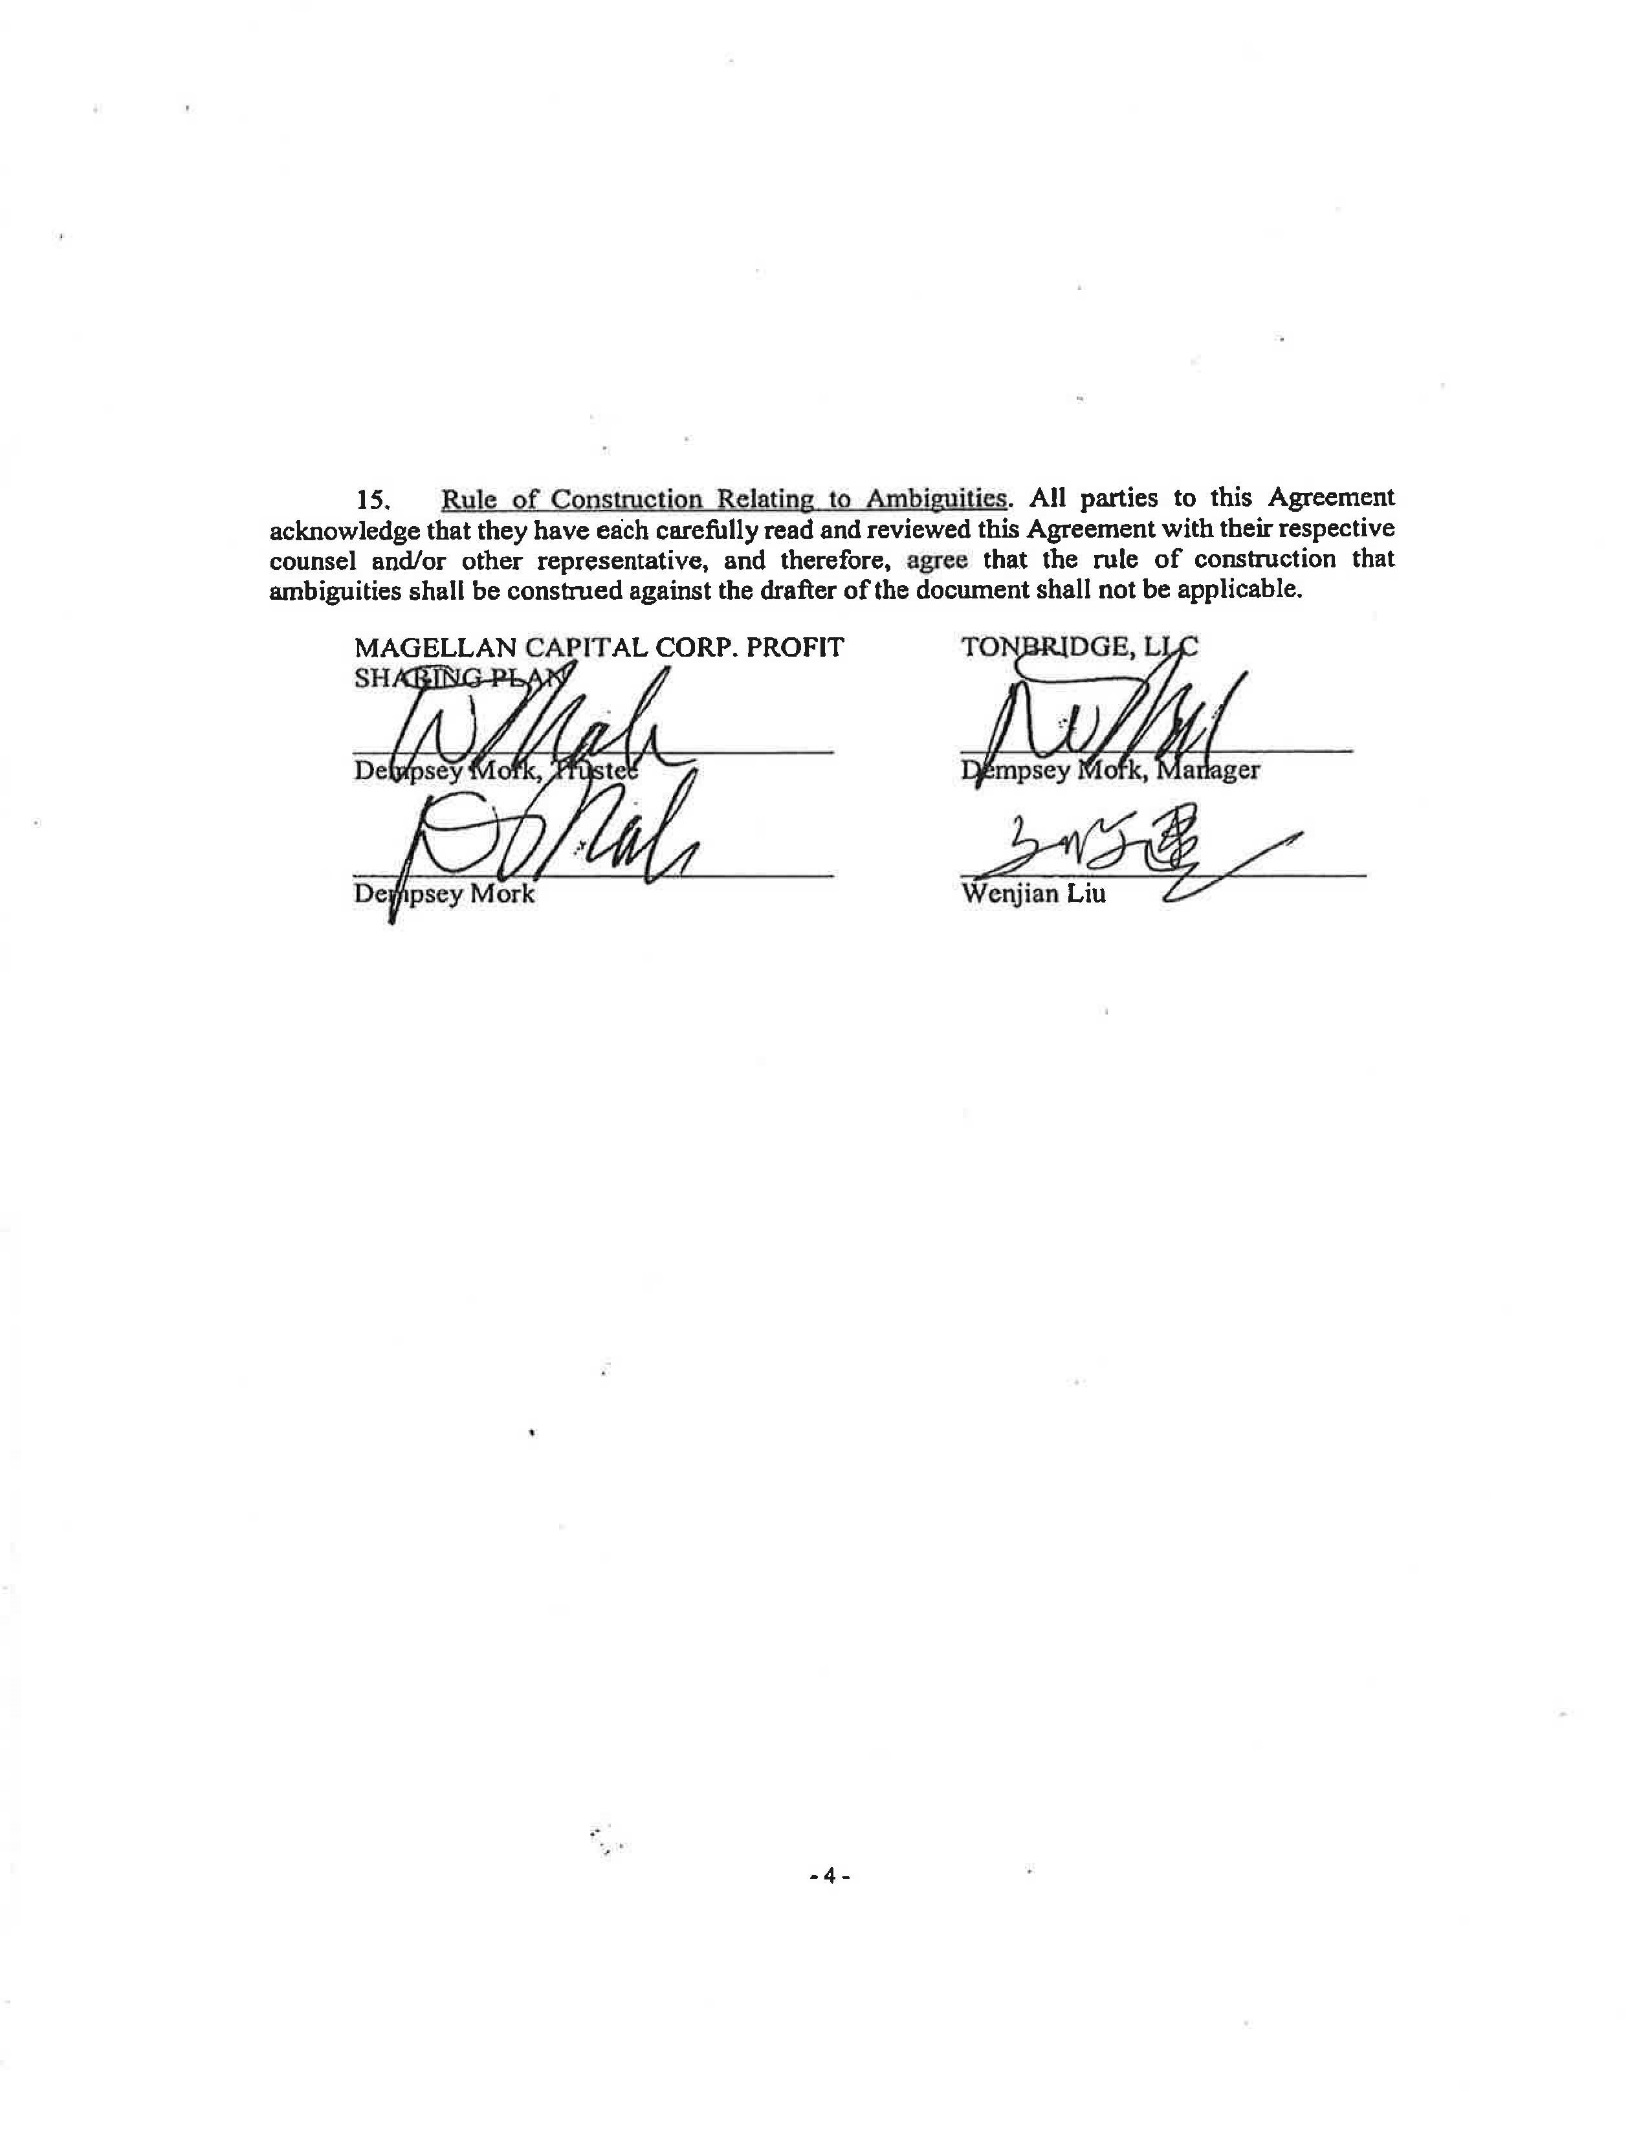 Stock Purchase Agreement (executed) (00571638xA9C08)_Page_4.jpg